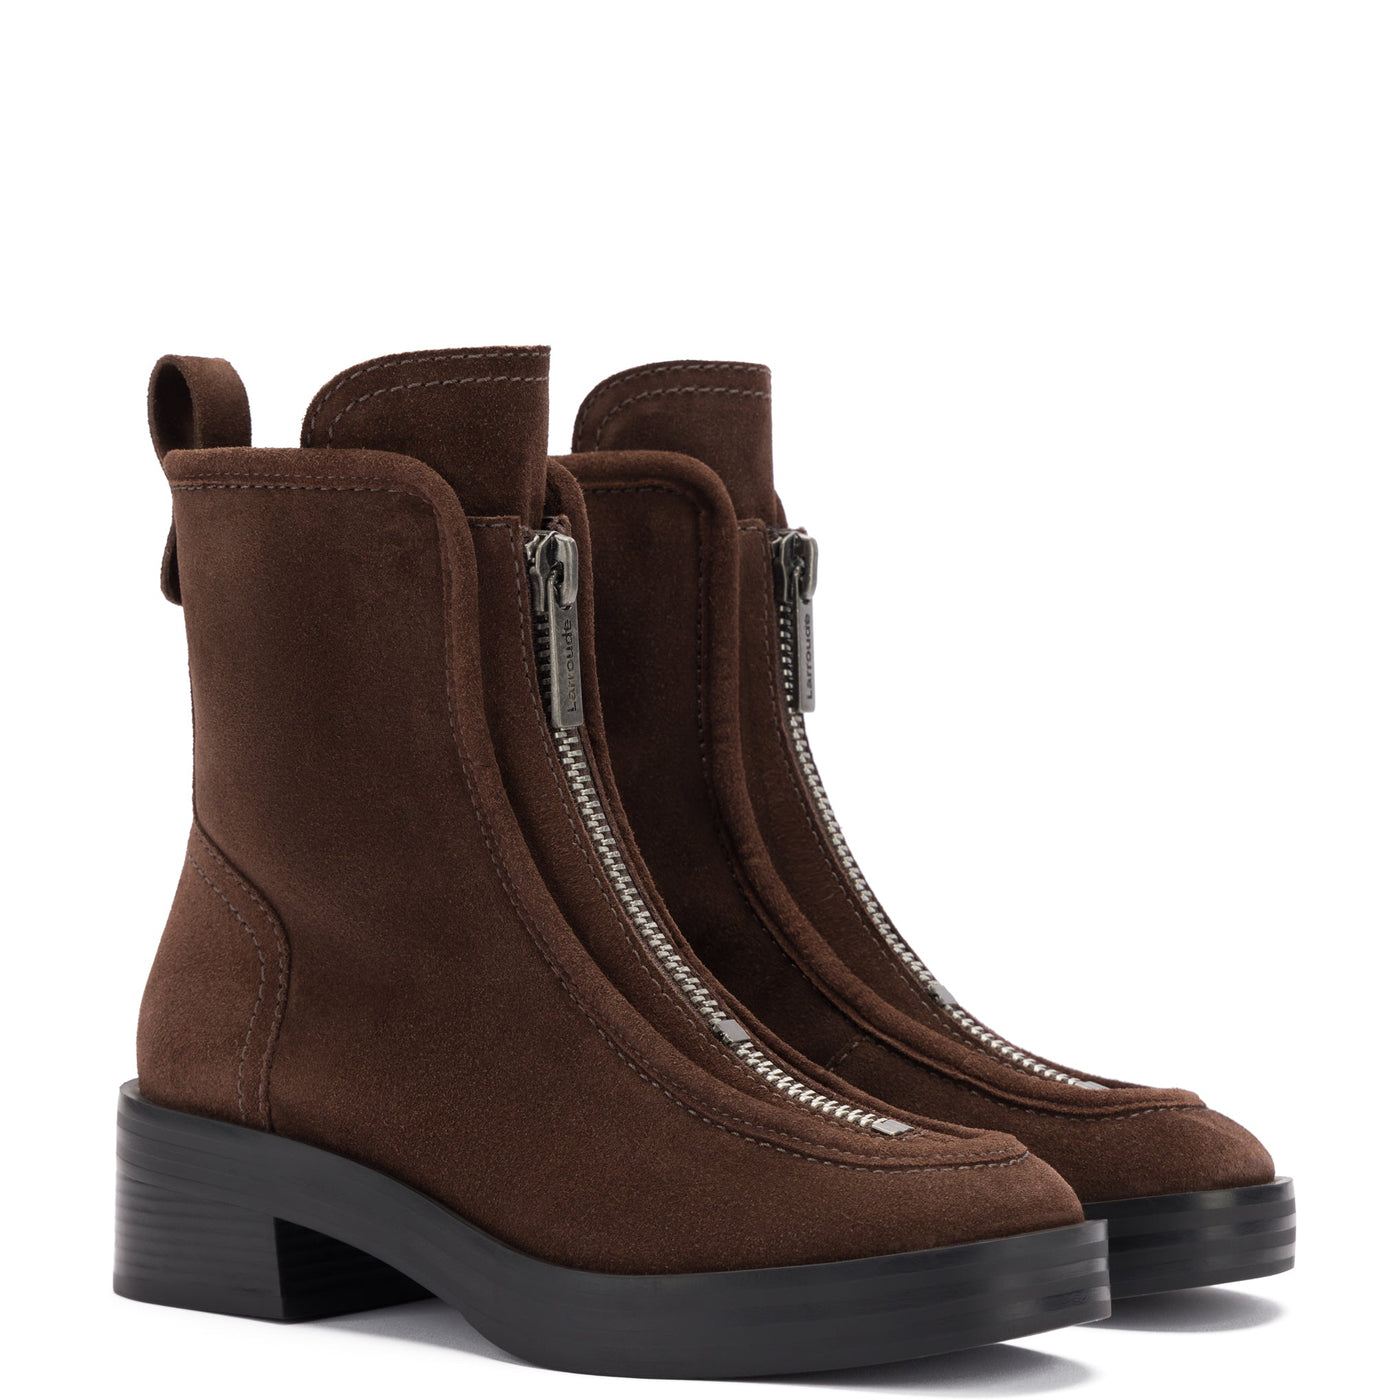 Nicole Lo Boot In Brown Suede